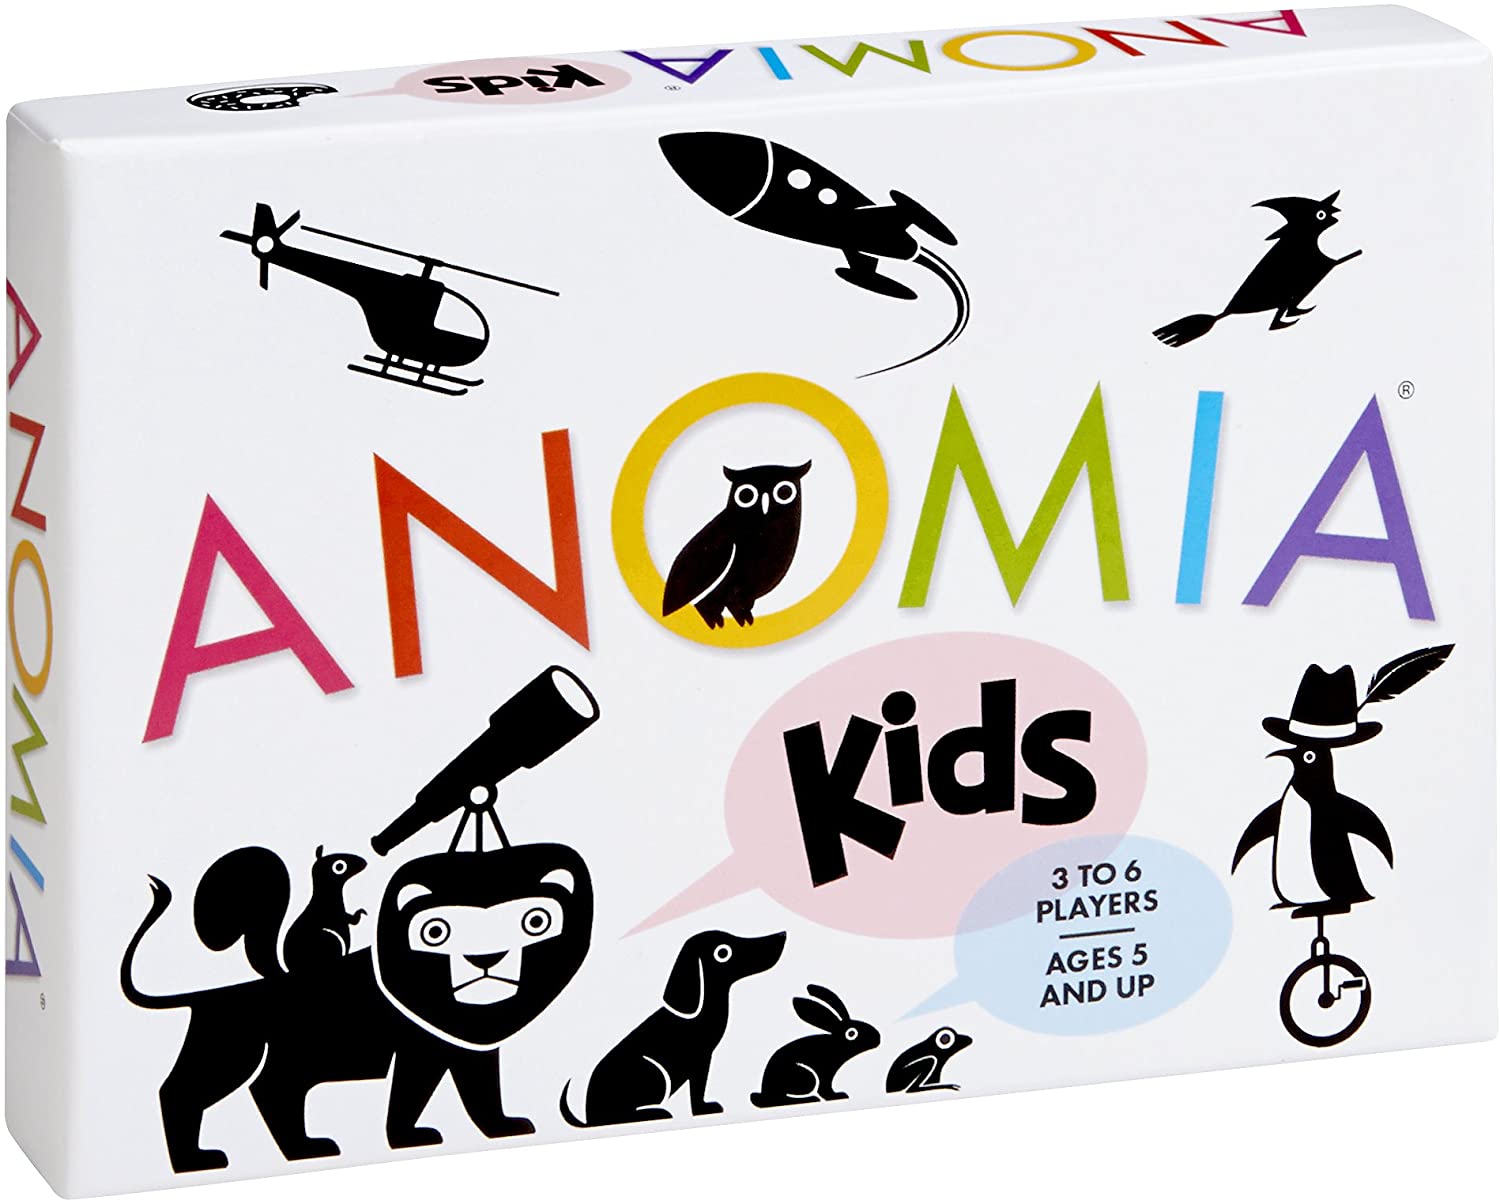 ANOMIA KIDS - CARD GAME | L.A. Mood Comics and Games